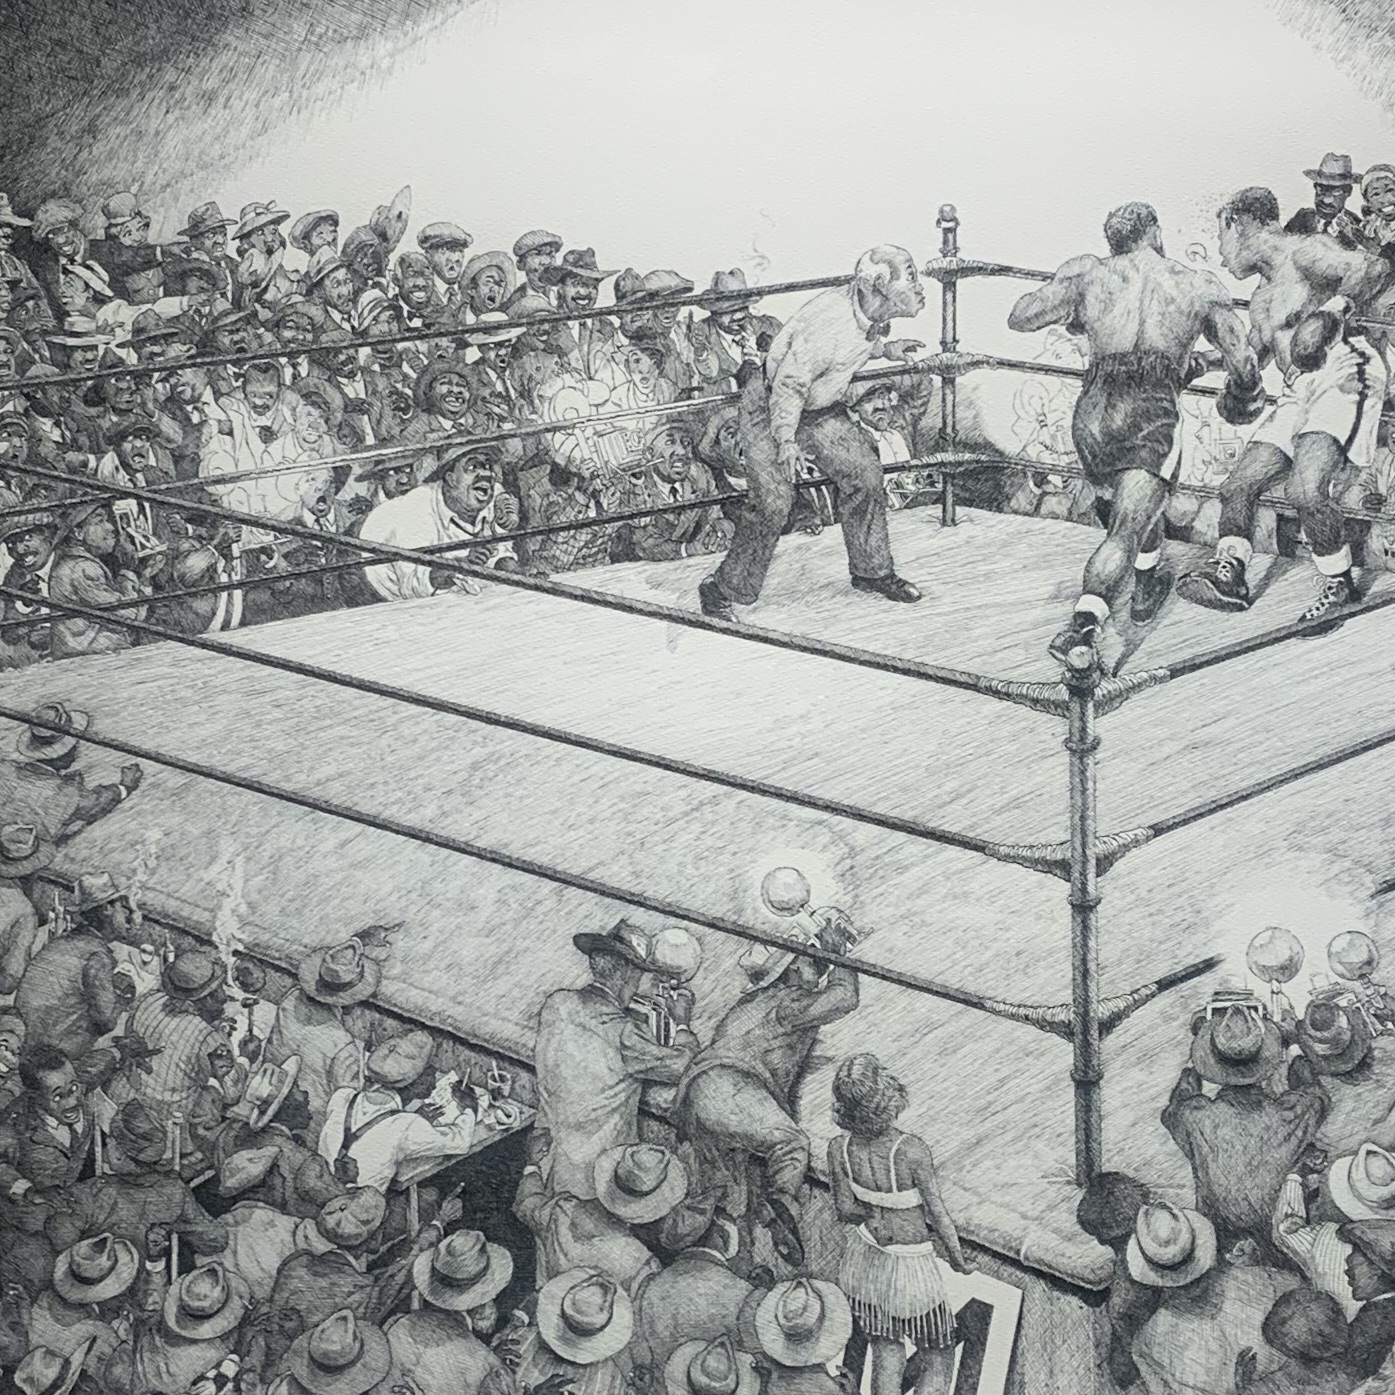 Knockout 1930 Image description: Black and White image of a boxing ring with an audience